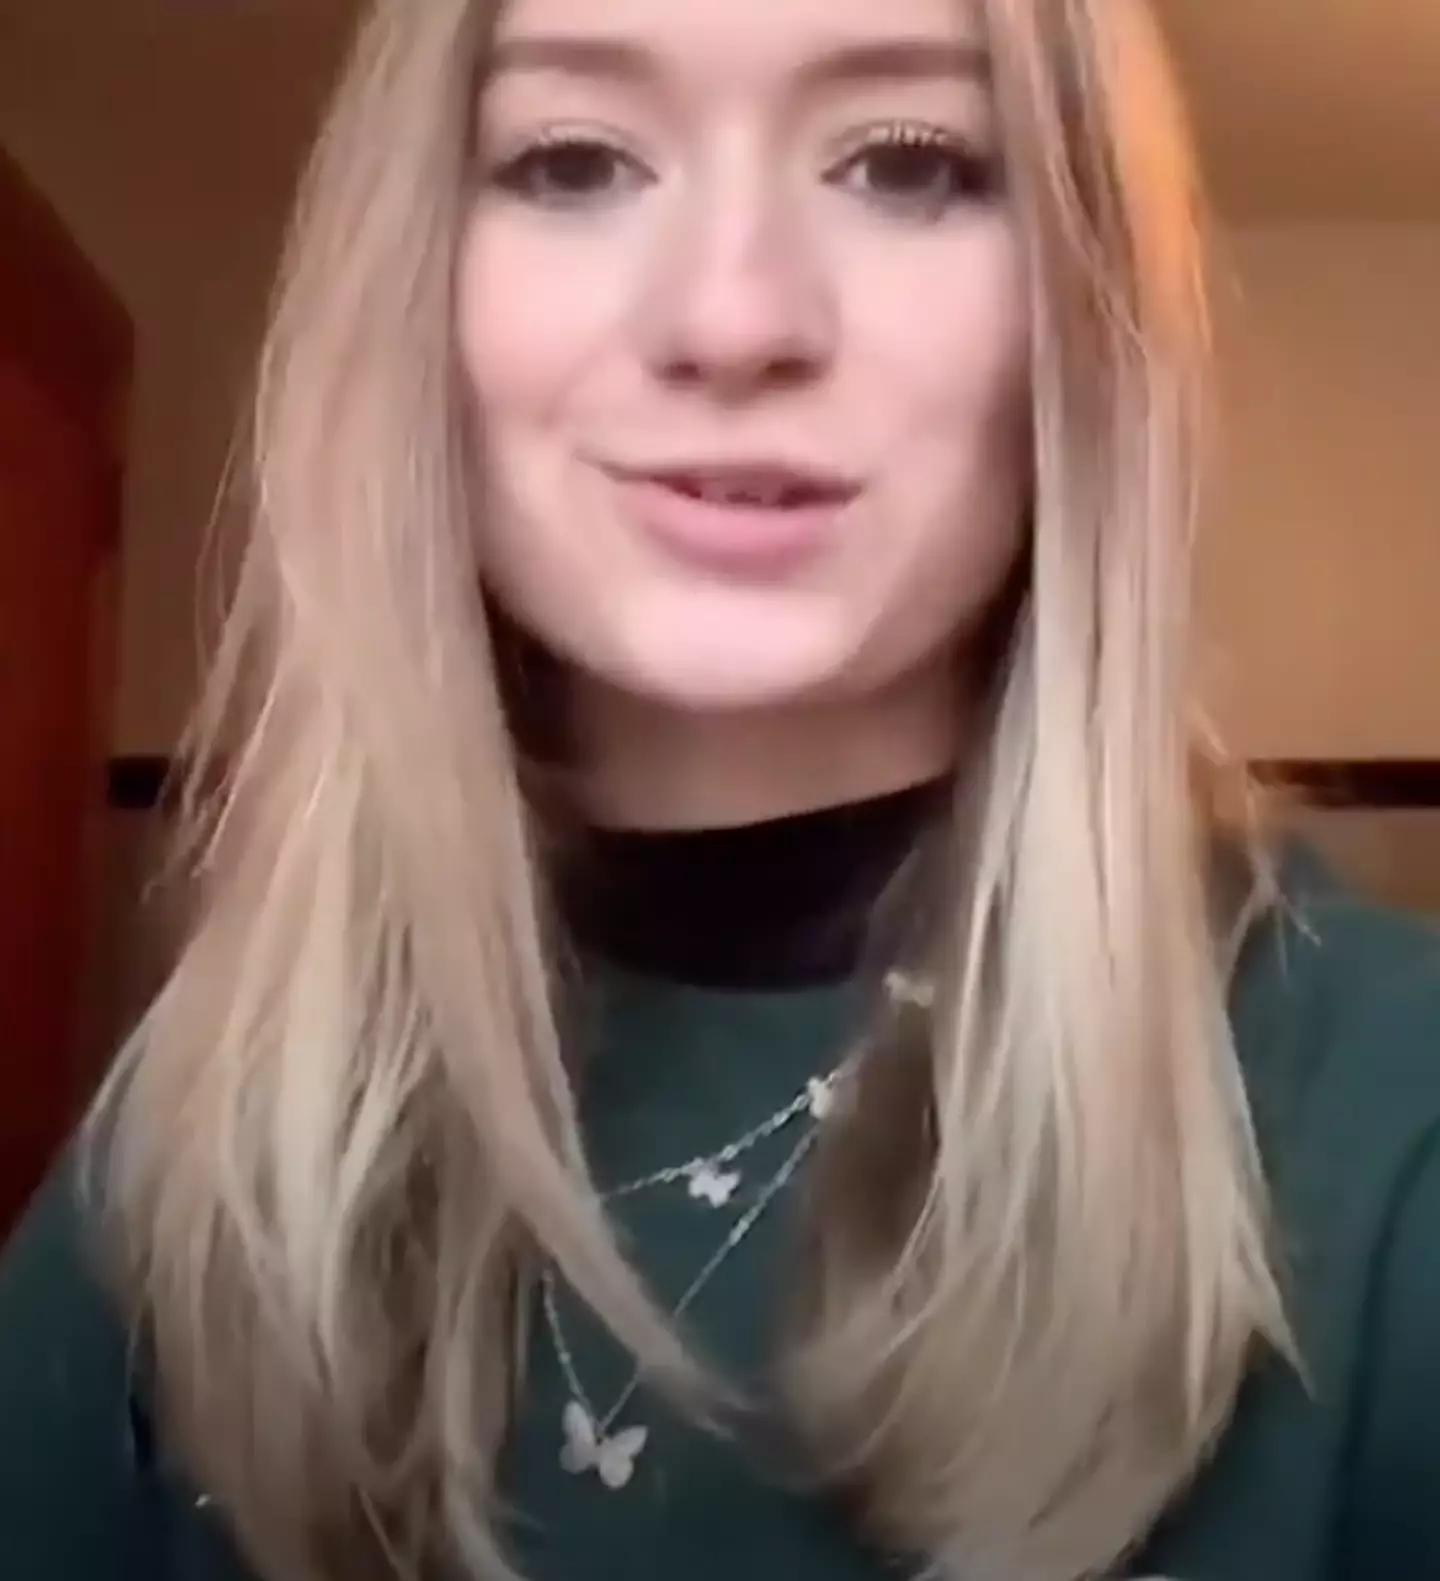 Gracie has confused TikTok viewers by 'delaying' her speech.